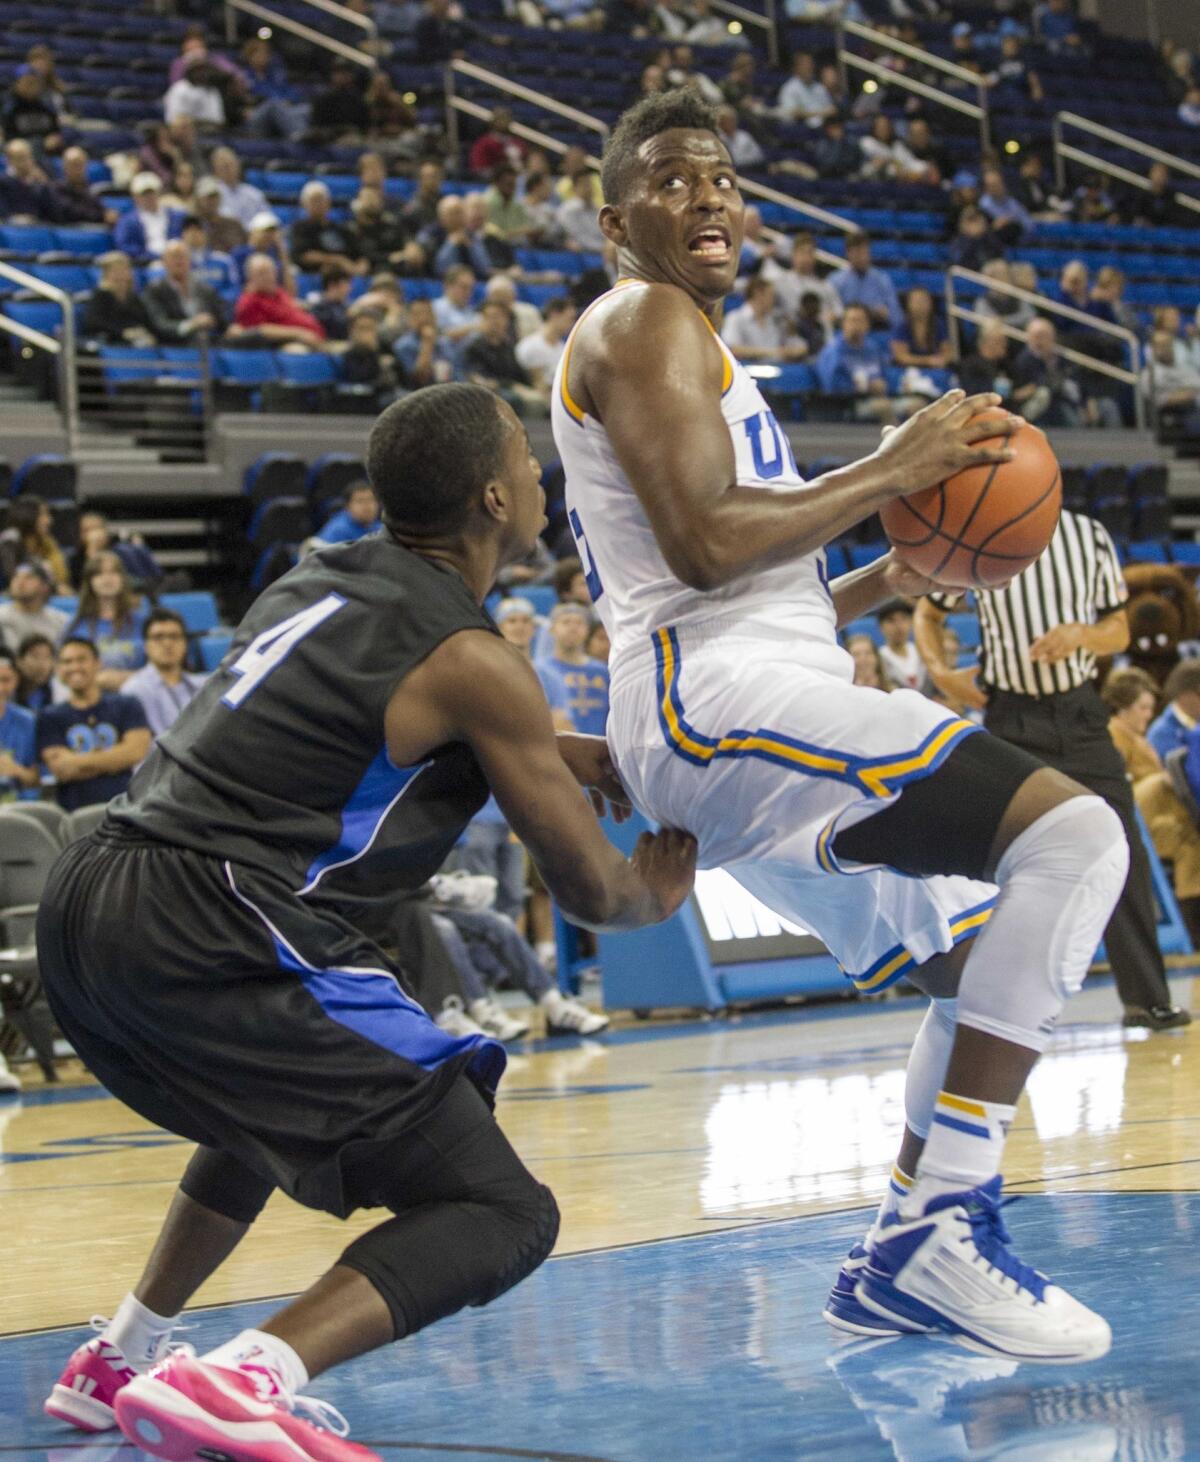 UCLA's Jordan Adams, right, drives to make his way past Cal State San Bernardino's Larry Thompkins III during a preseason game last month. Adams is glad the hype that surrounded last year's freshman class has died down.